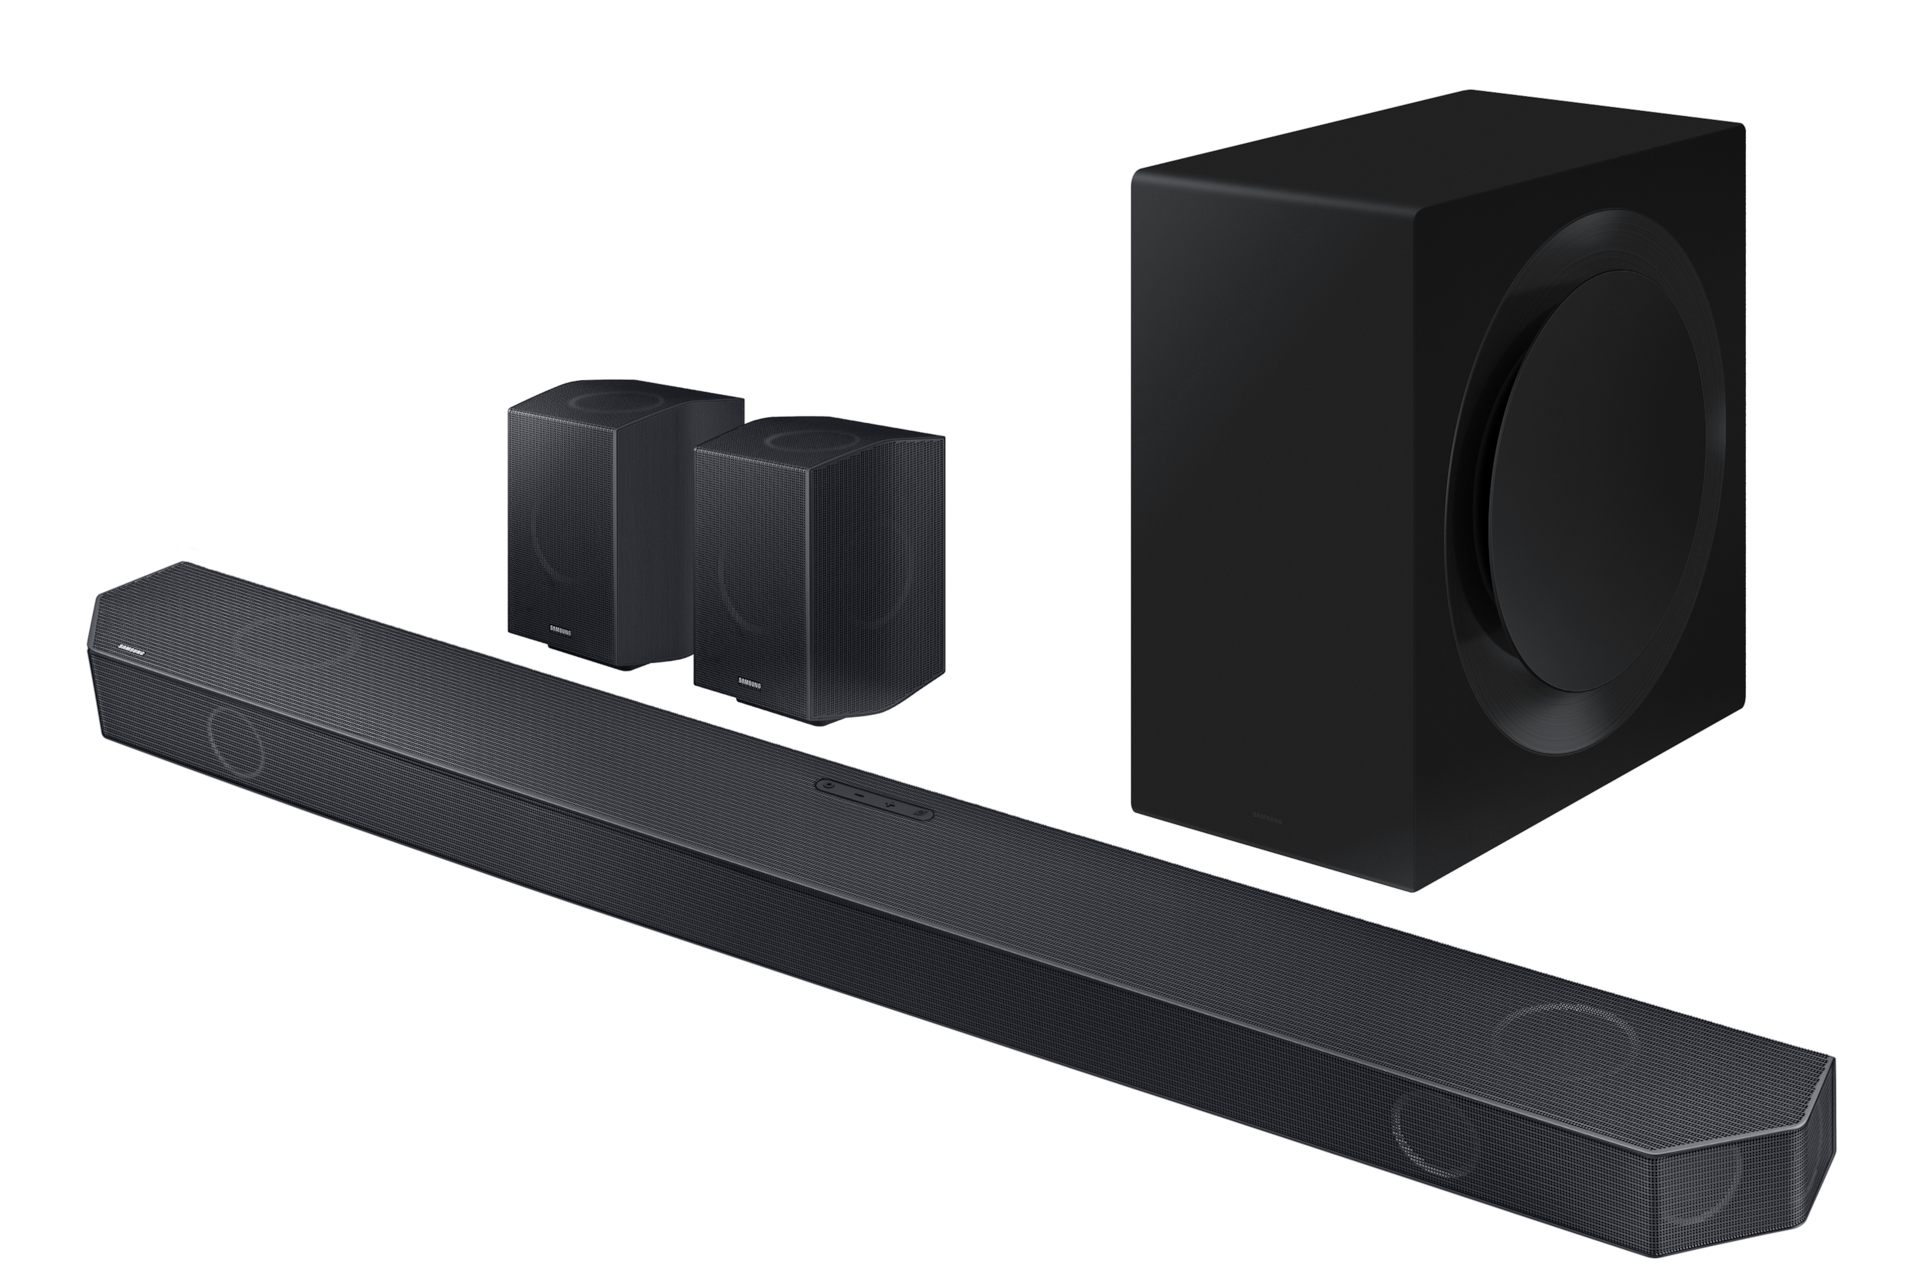 Latest Samsung Q Series Soundbar with Subwoofer (HW-Q990C/XM) - set-r-perspective view, Titan Black color at best price in Samsung Malaysia